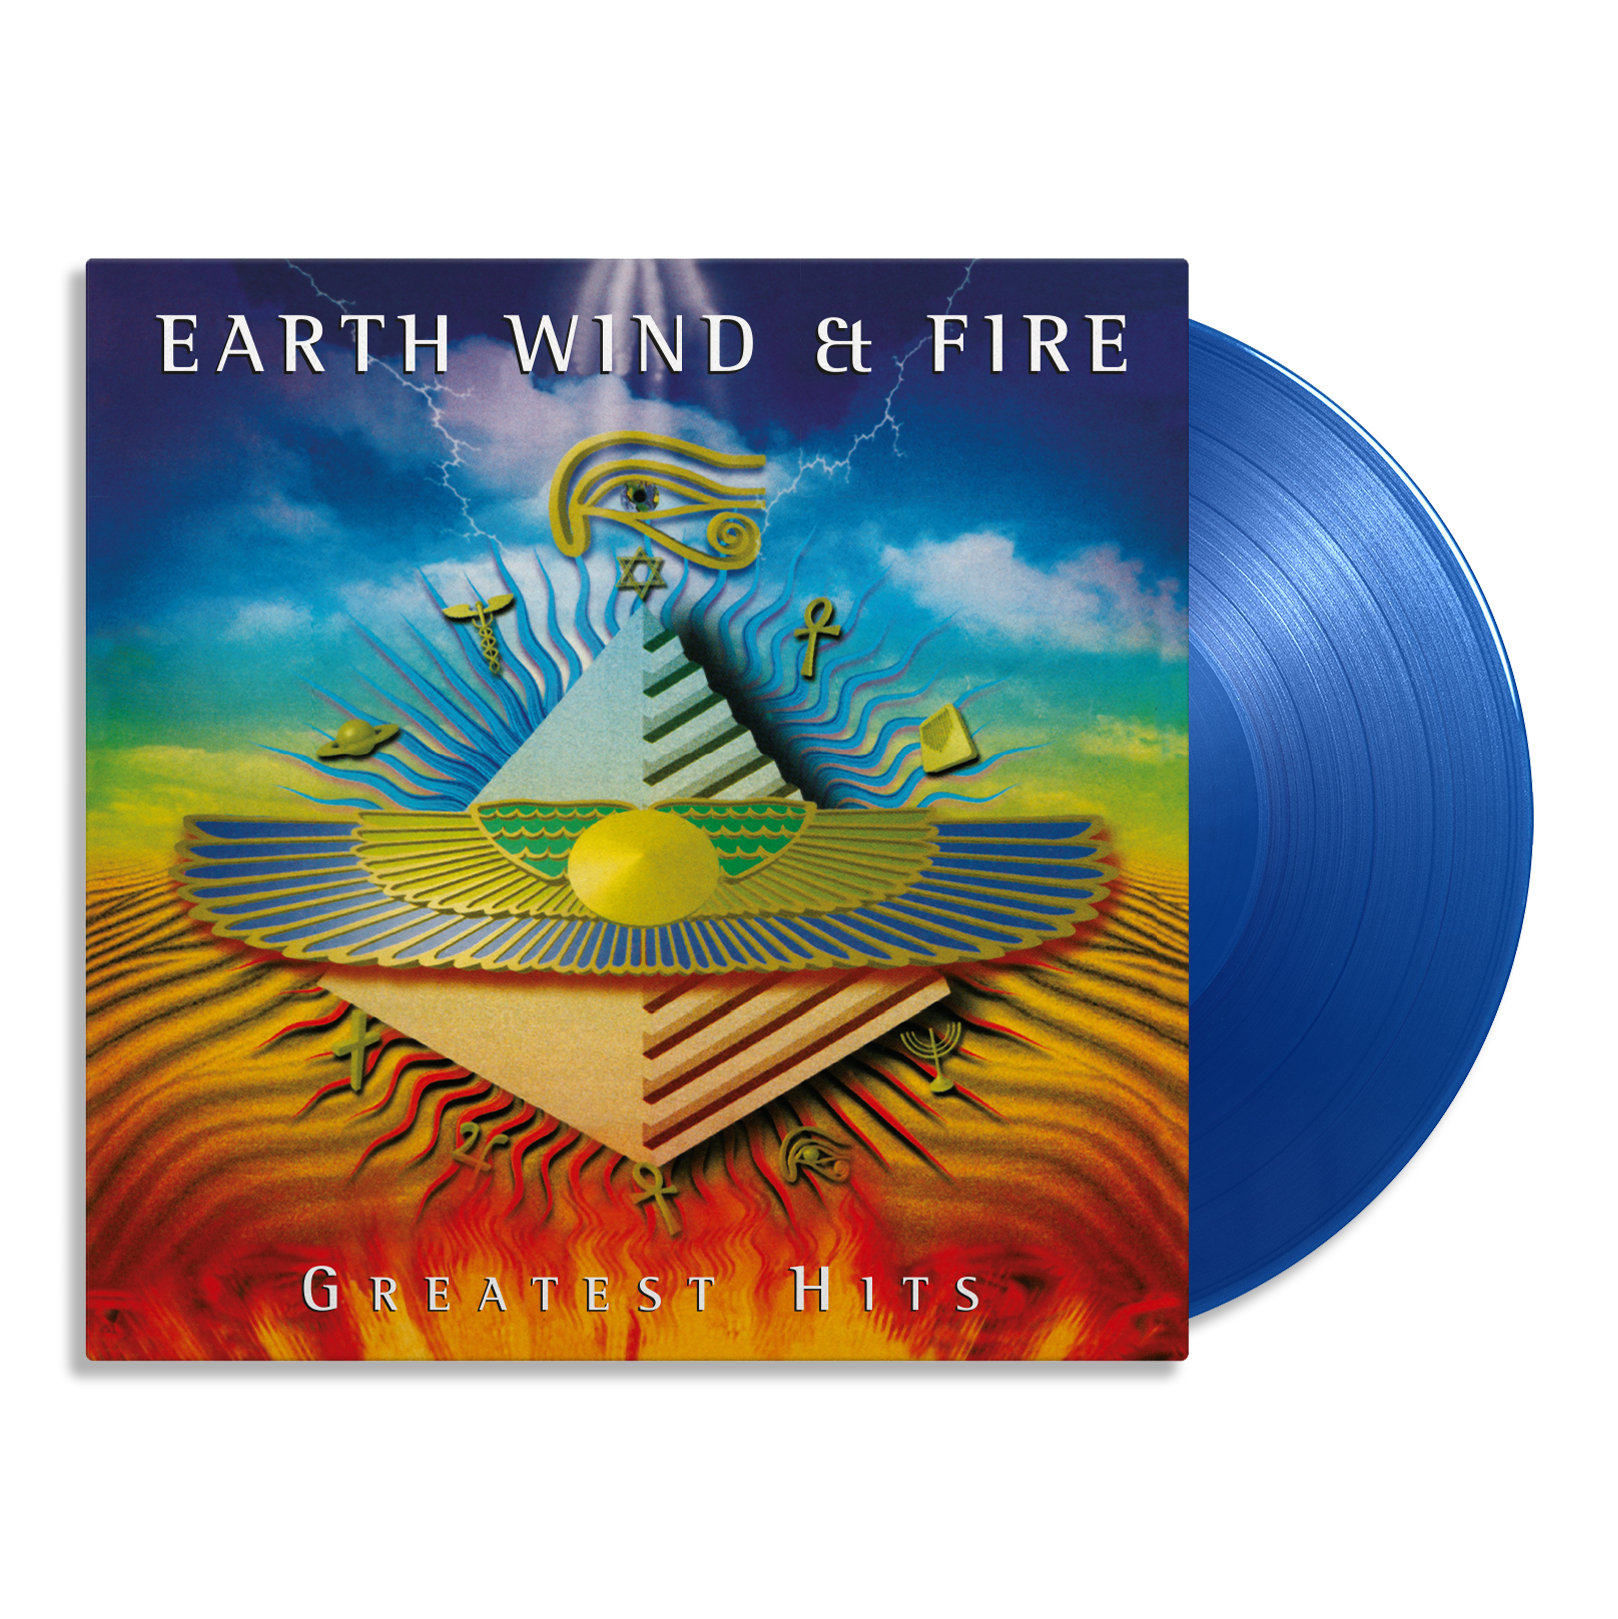 Earth, Wind & Fire - Greatest Hits: Limited Translucent Blue Vinyl 2LP